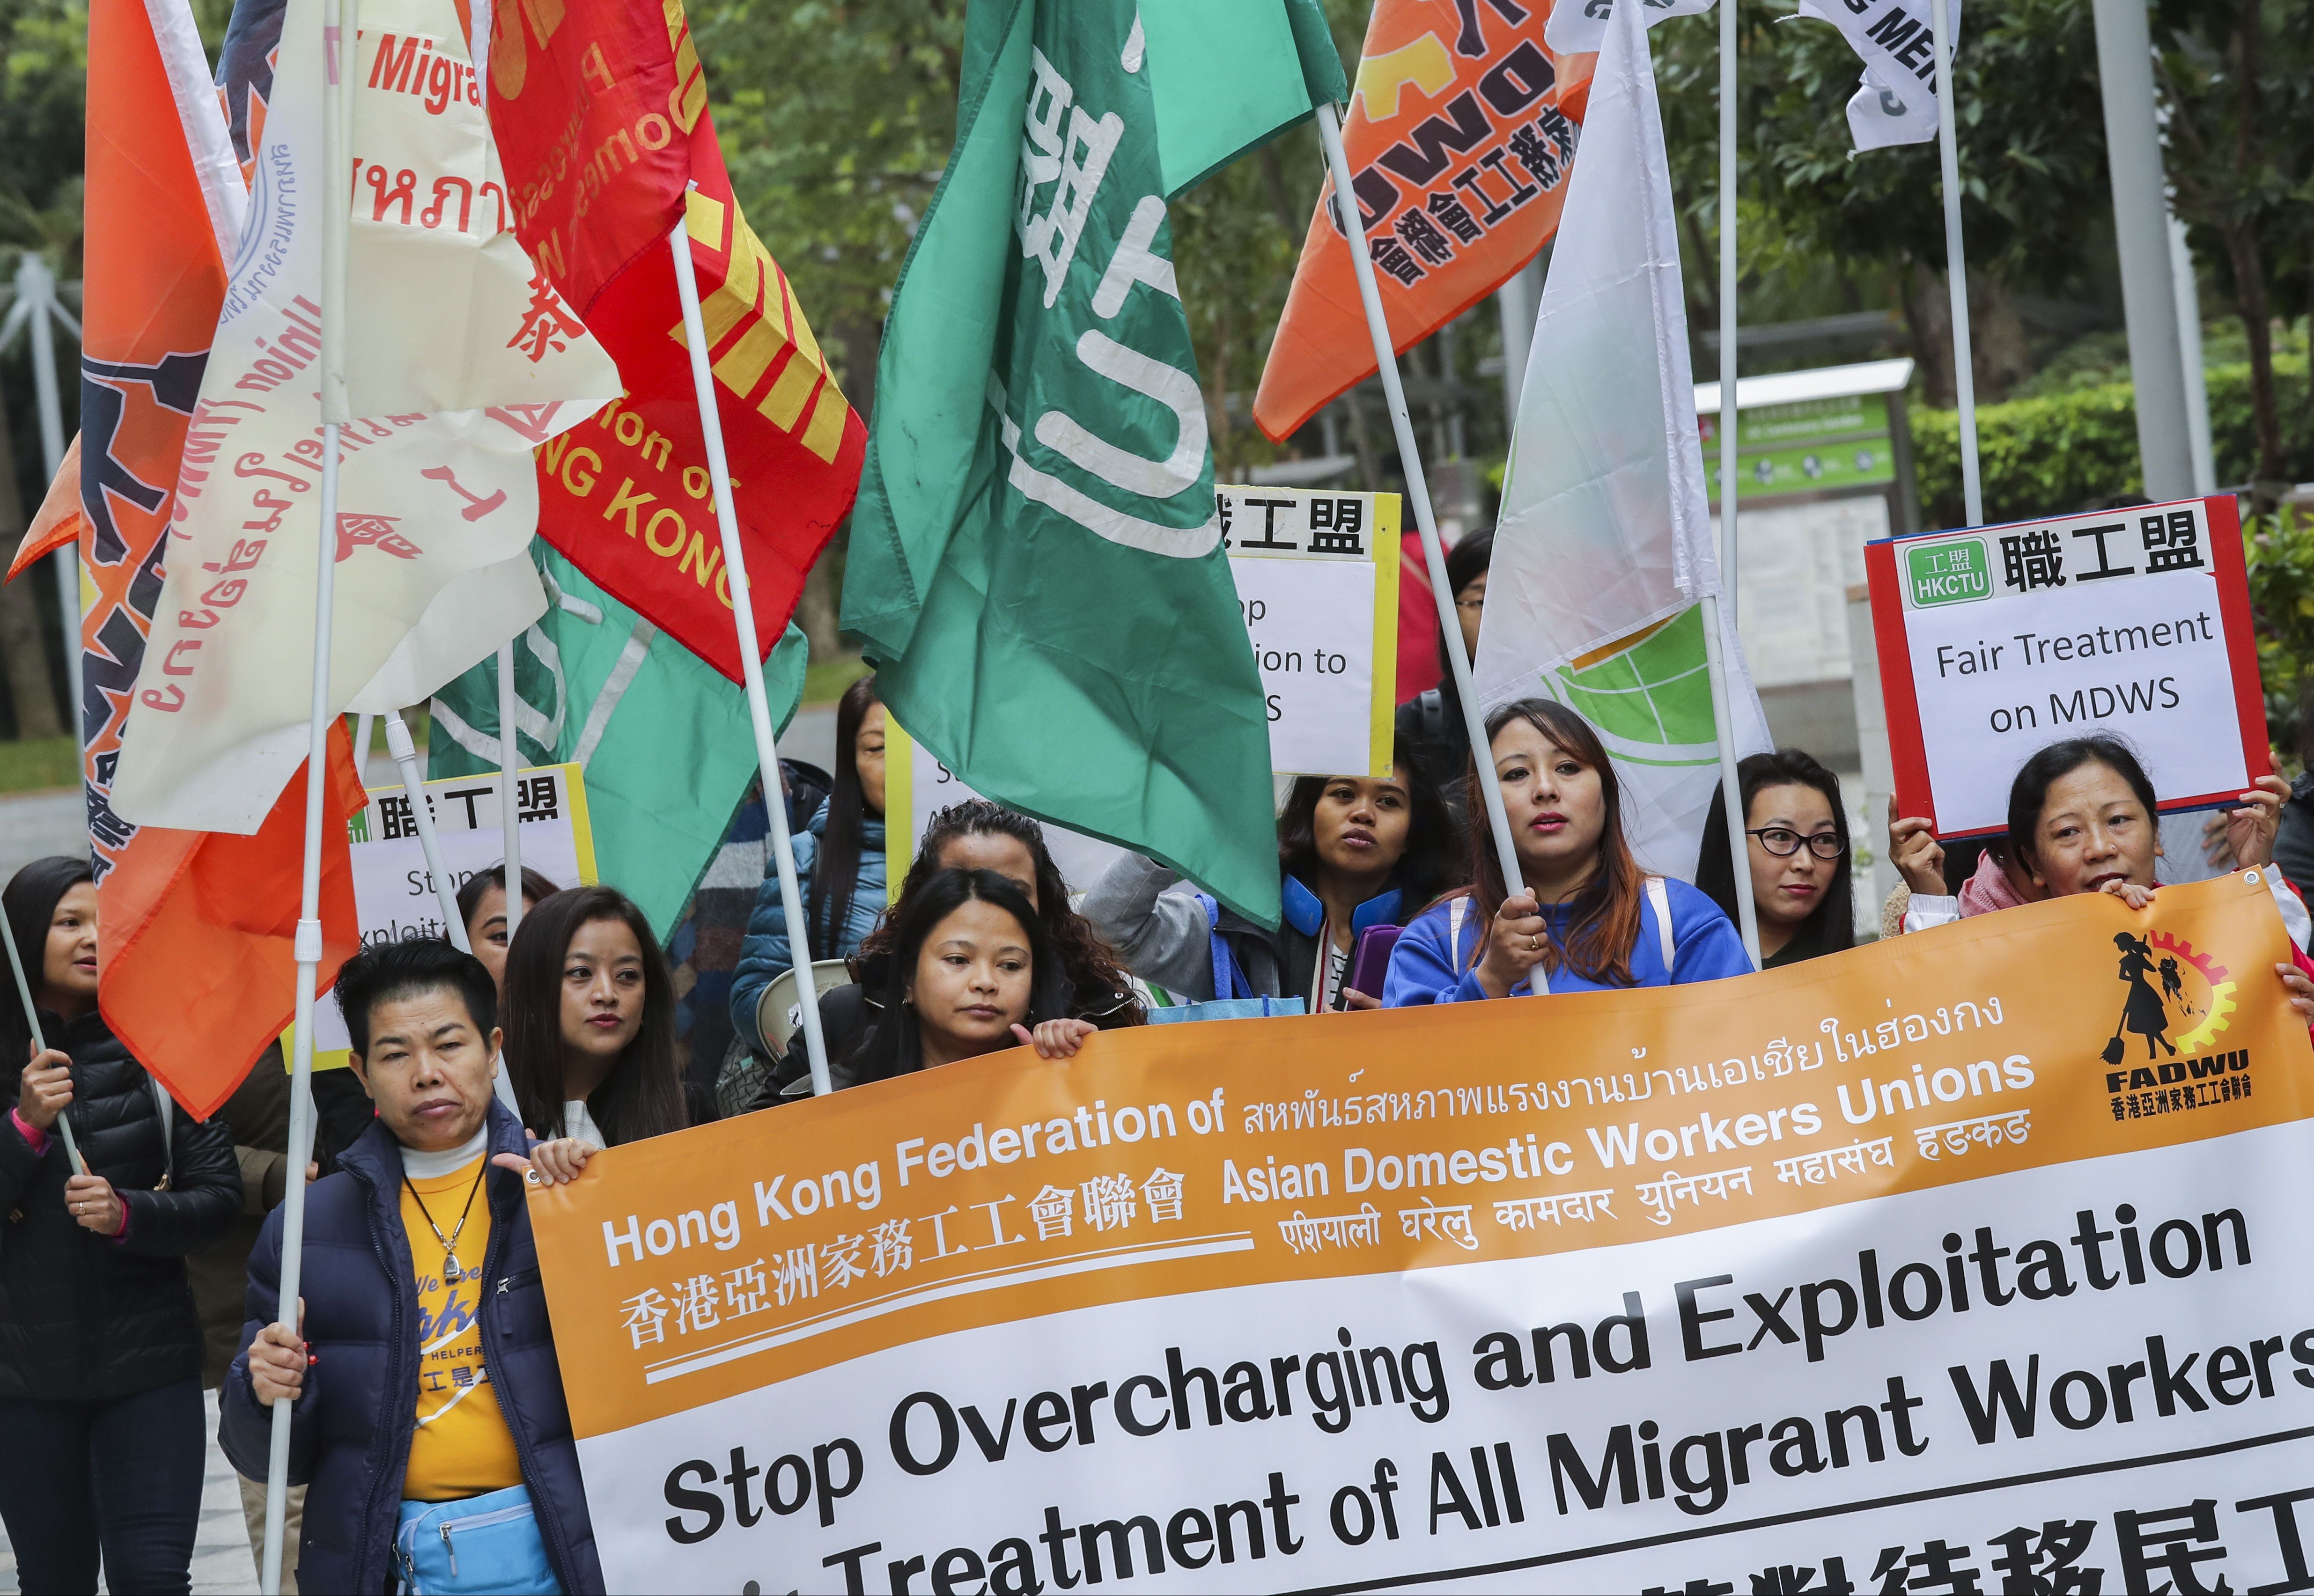 The march was to coincide with UN International Migrants Day. Photo: K.Y. Cheng